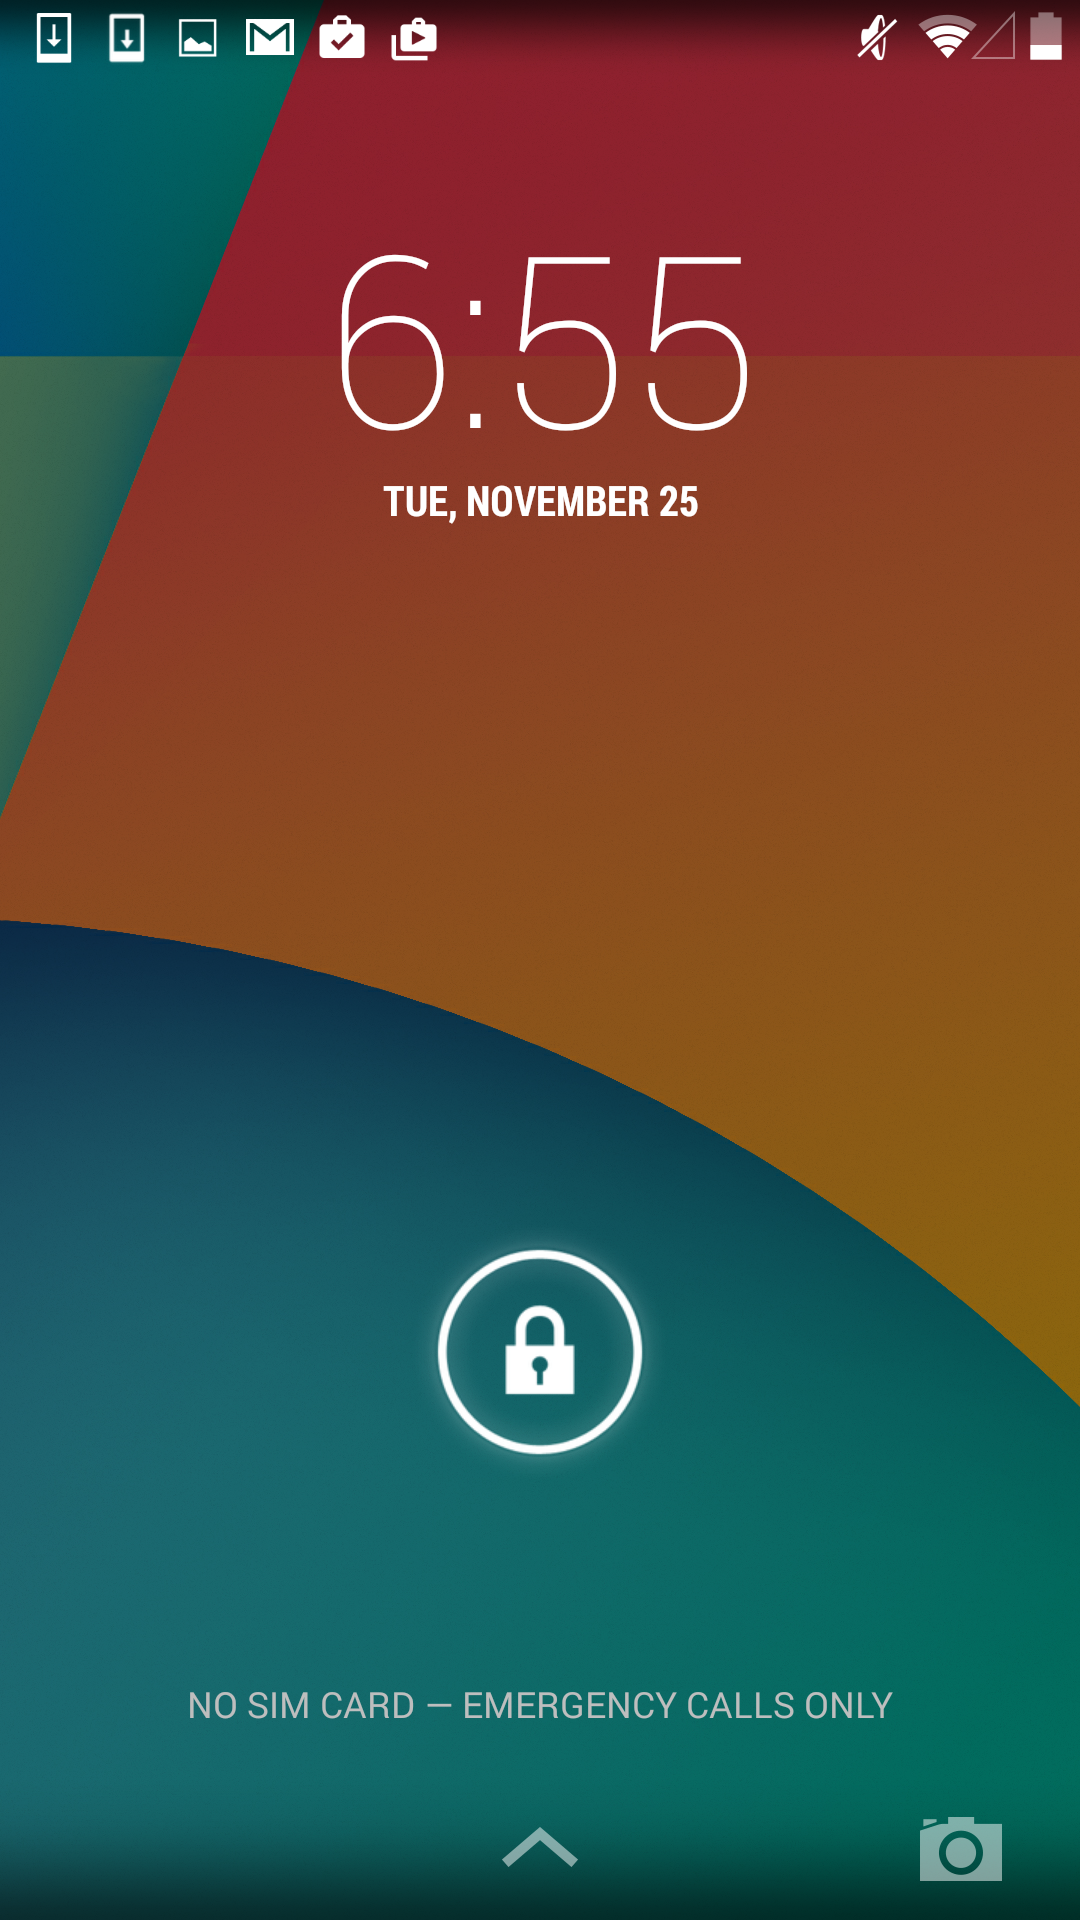 Lock Screen, Launcher, Keyboard, and Navigation Buttons The Android 5